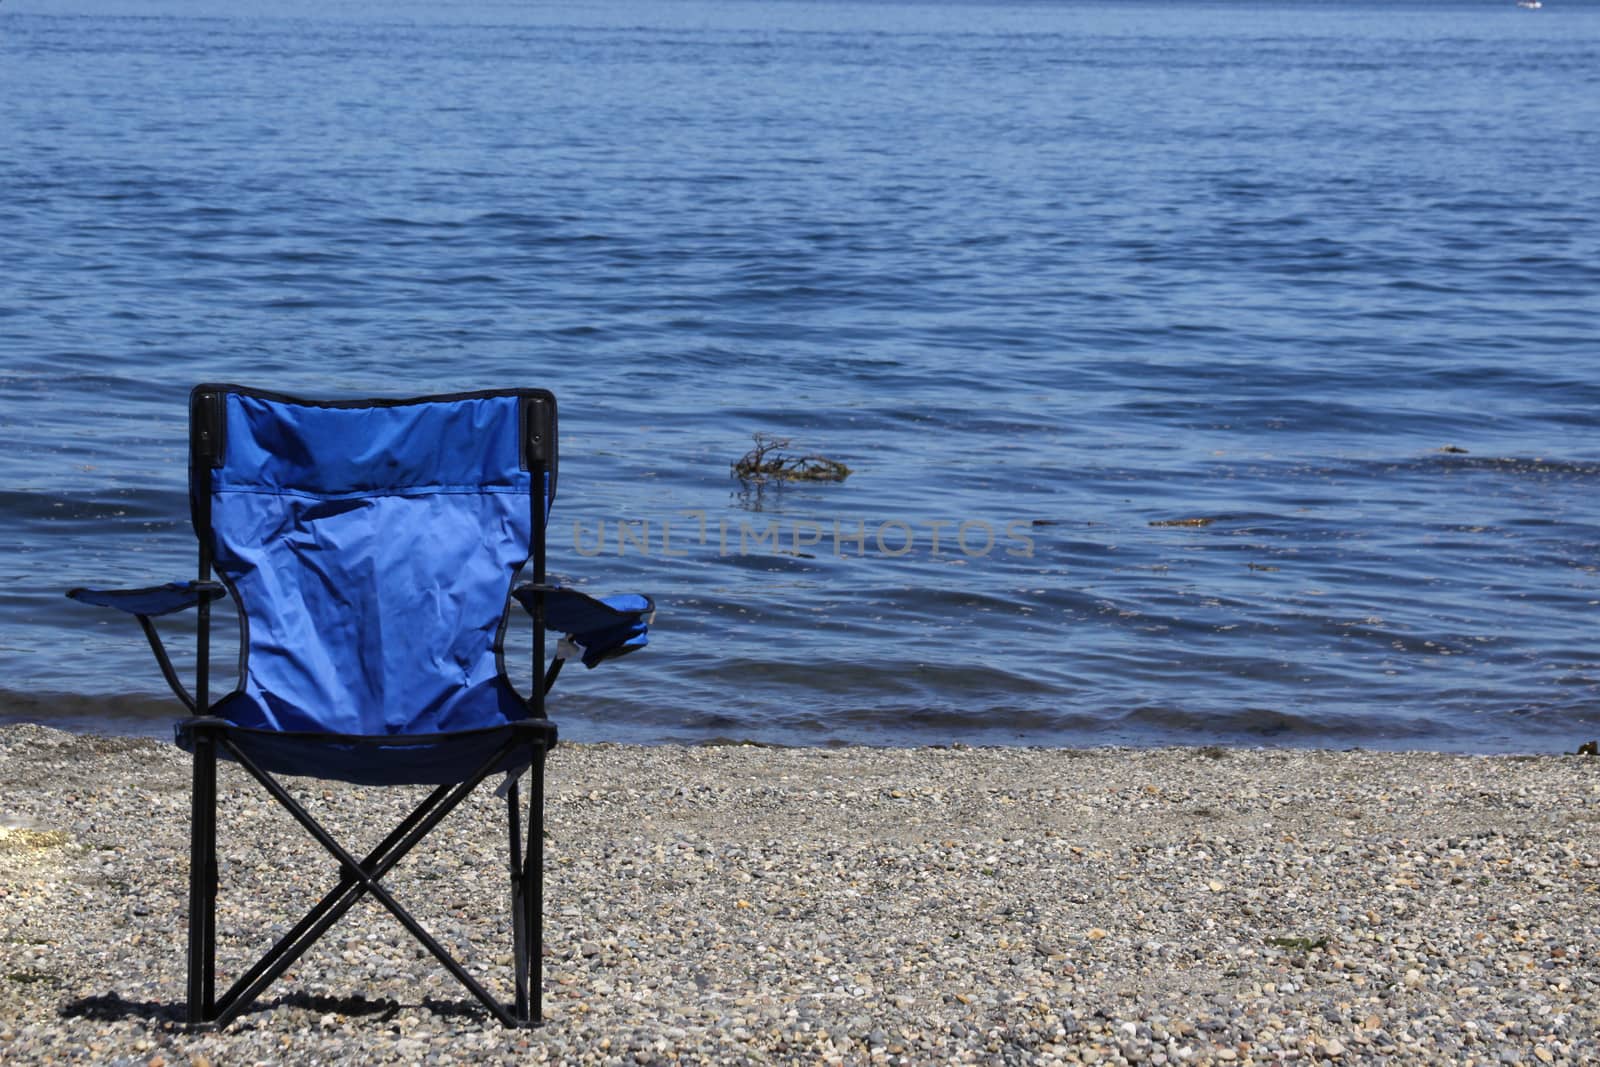 A blue chair on the beach inviting someone to relax.